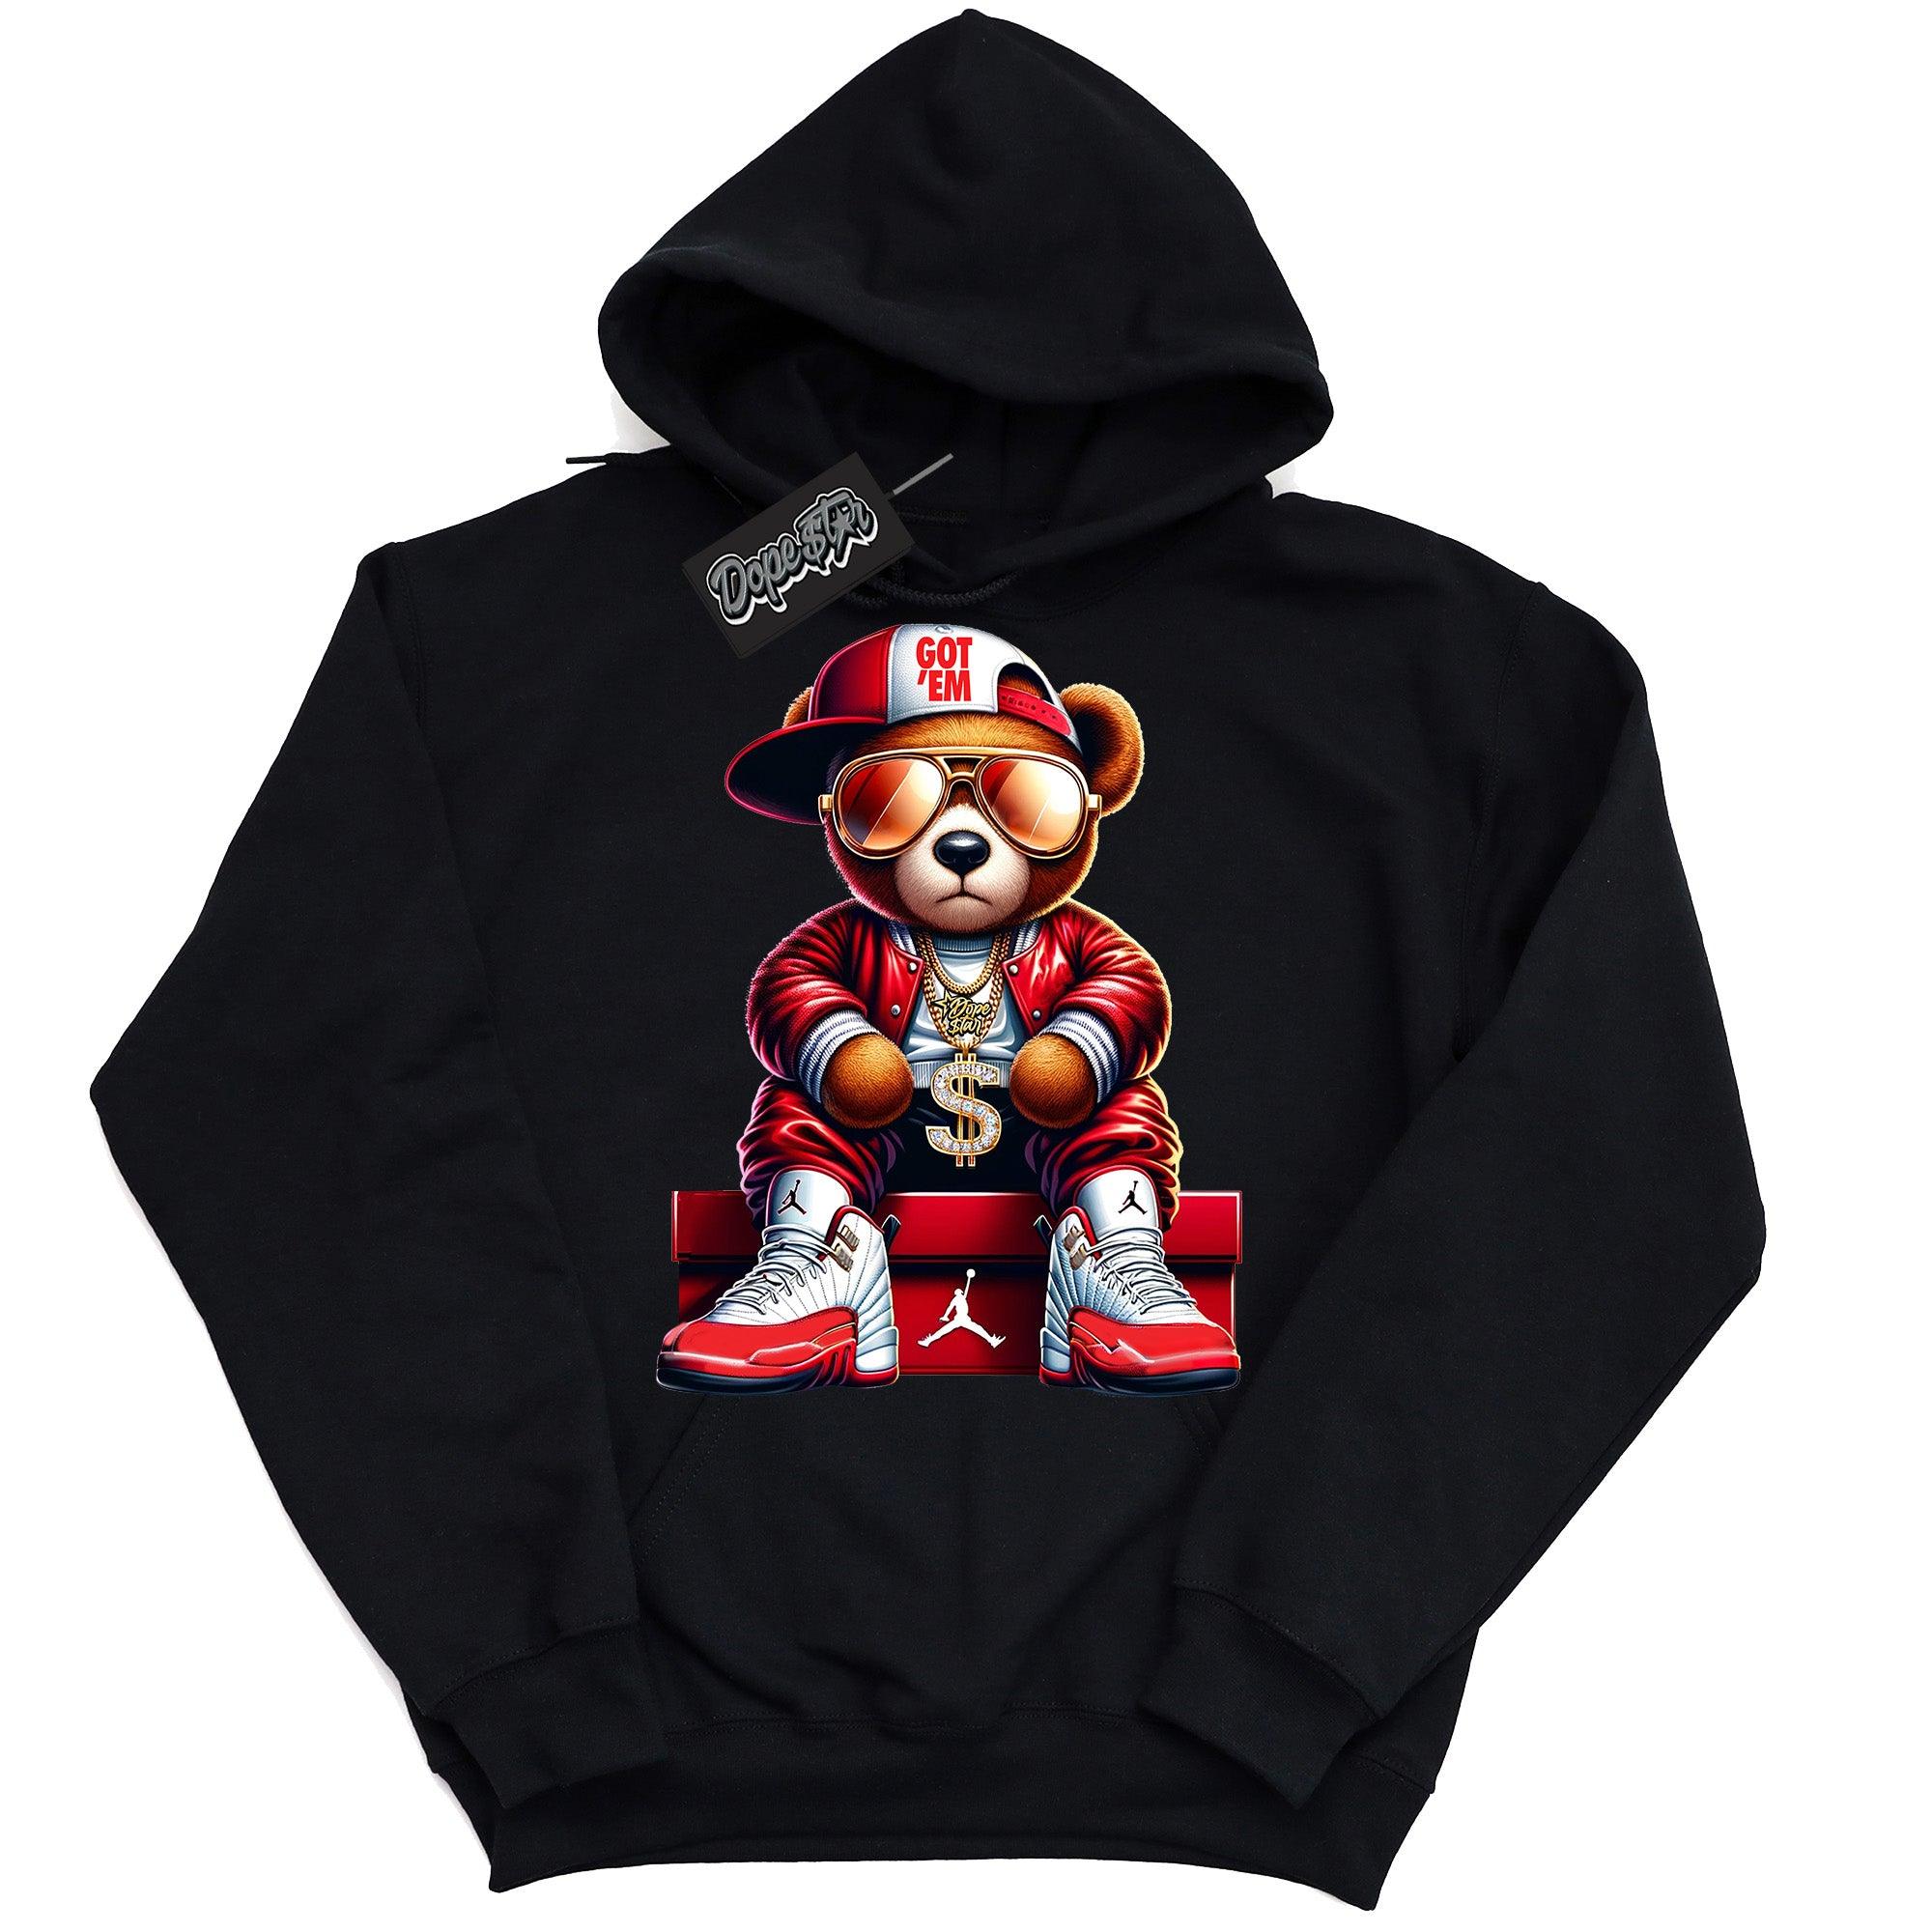 Cool Black Graphic Hoodie with “ Get Em Bear “ print, that perfectly matches Air Jordan 12 Cherry sneakers